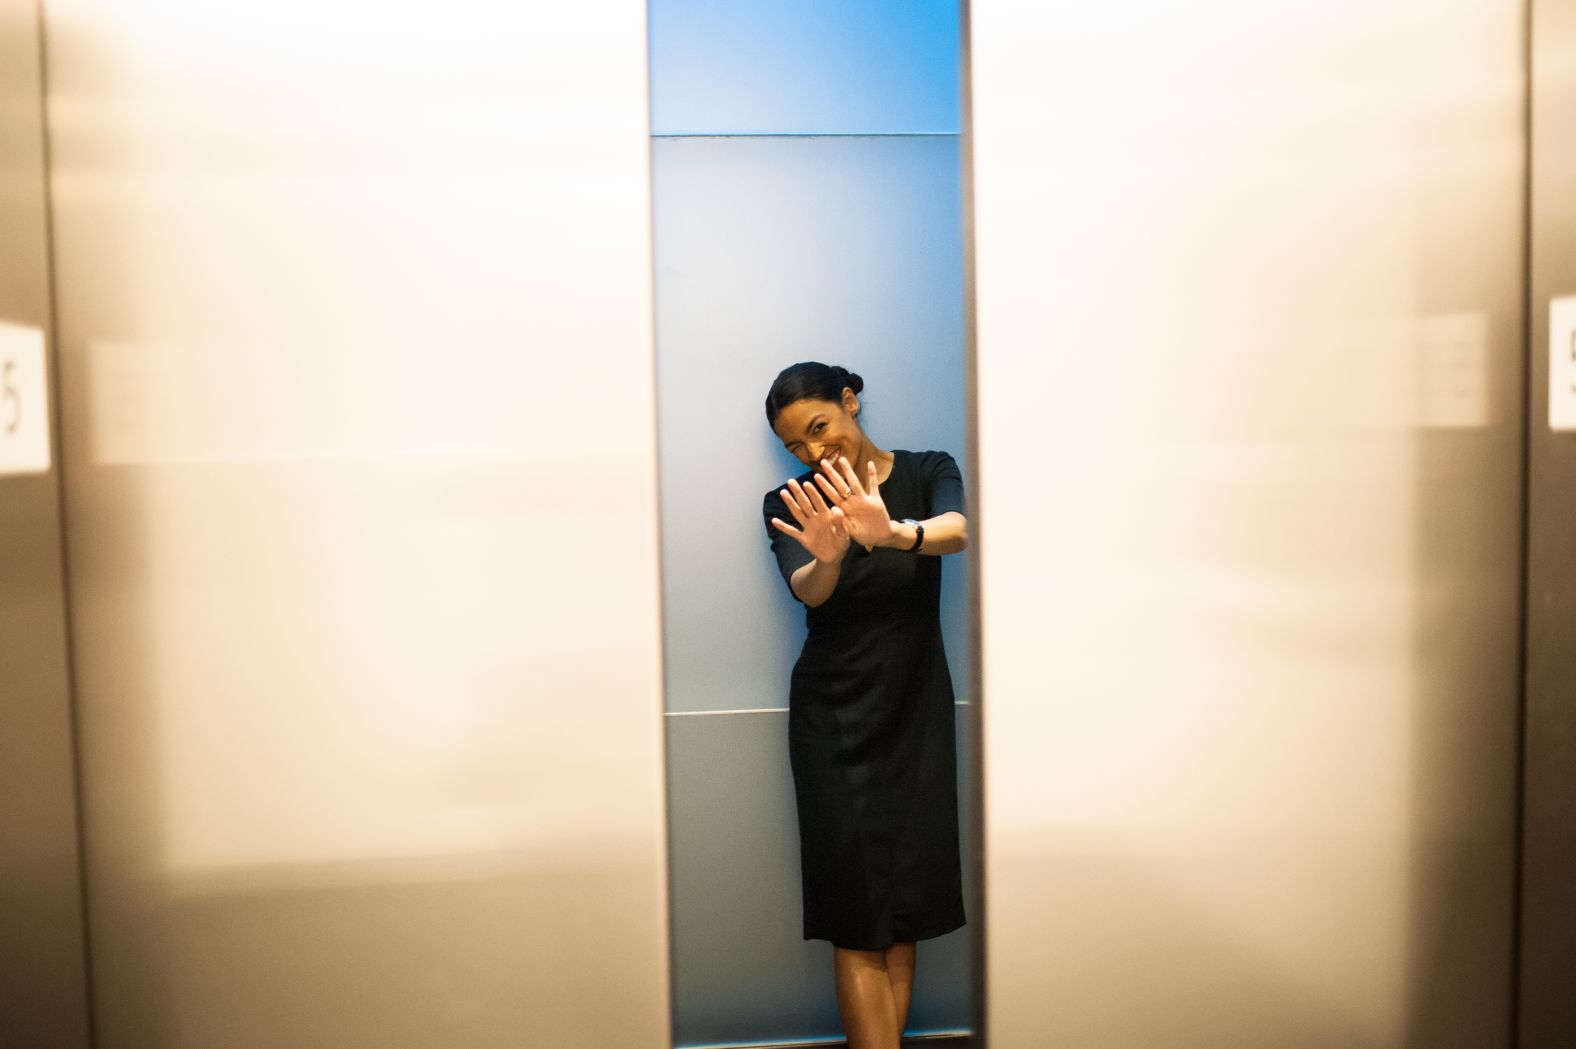 Ocasio-Cortez waves as the elevators close in the Time Warner Center in New York on Wednesday. On her way out, one of her campaign members told her about Germany's loss in the World Cup. She replied, "Must have been a big day for upsets."